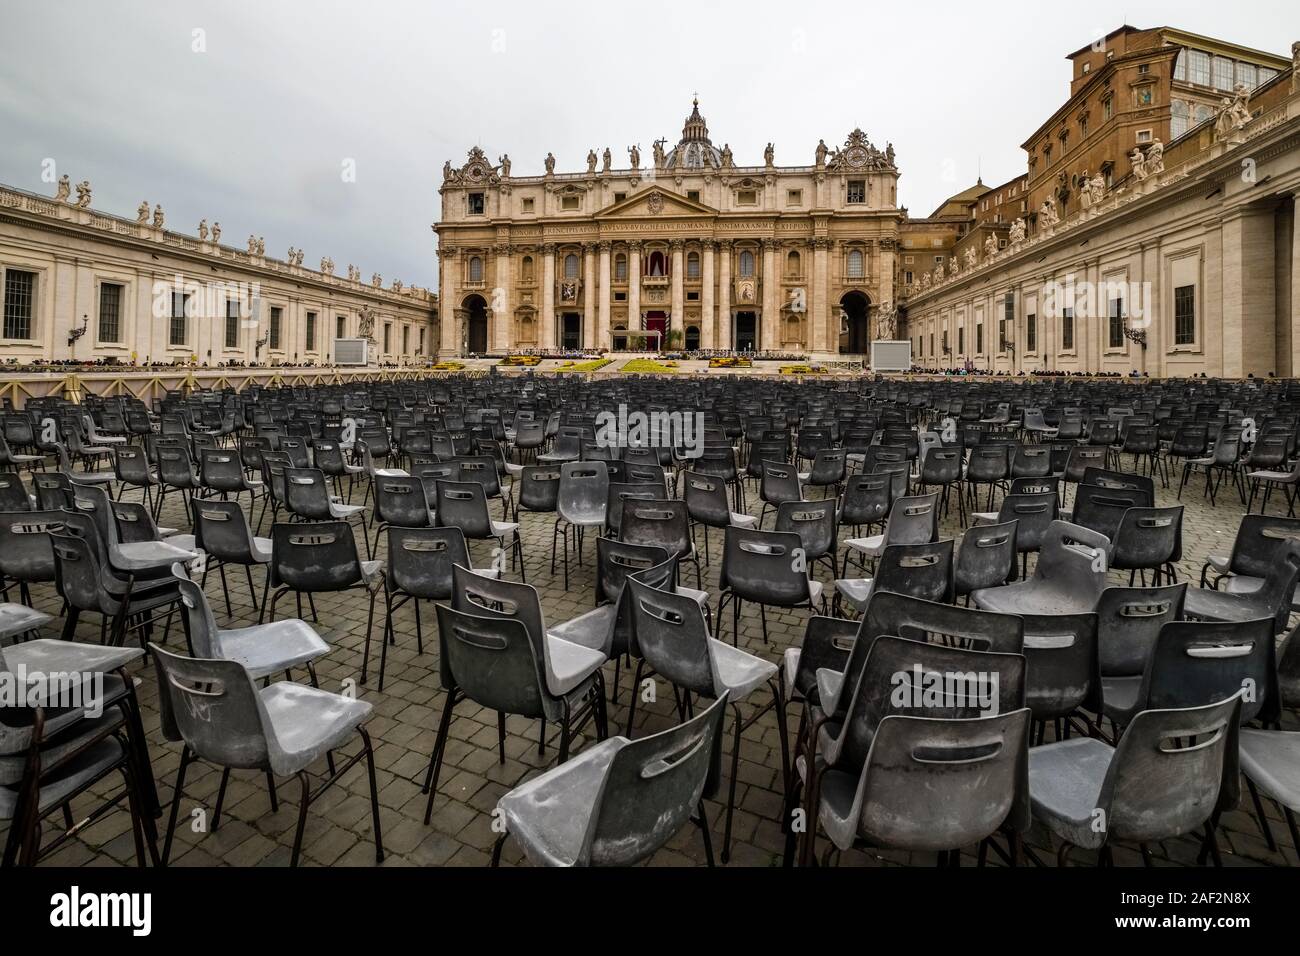 Many empty chairs remain on St. Peter's Square after the Easter sermon of the Pope, the Papal Basilica of St. Peter, St. Peter's Basilica in the dista Stock Photo